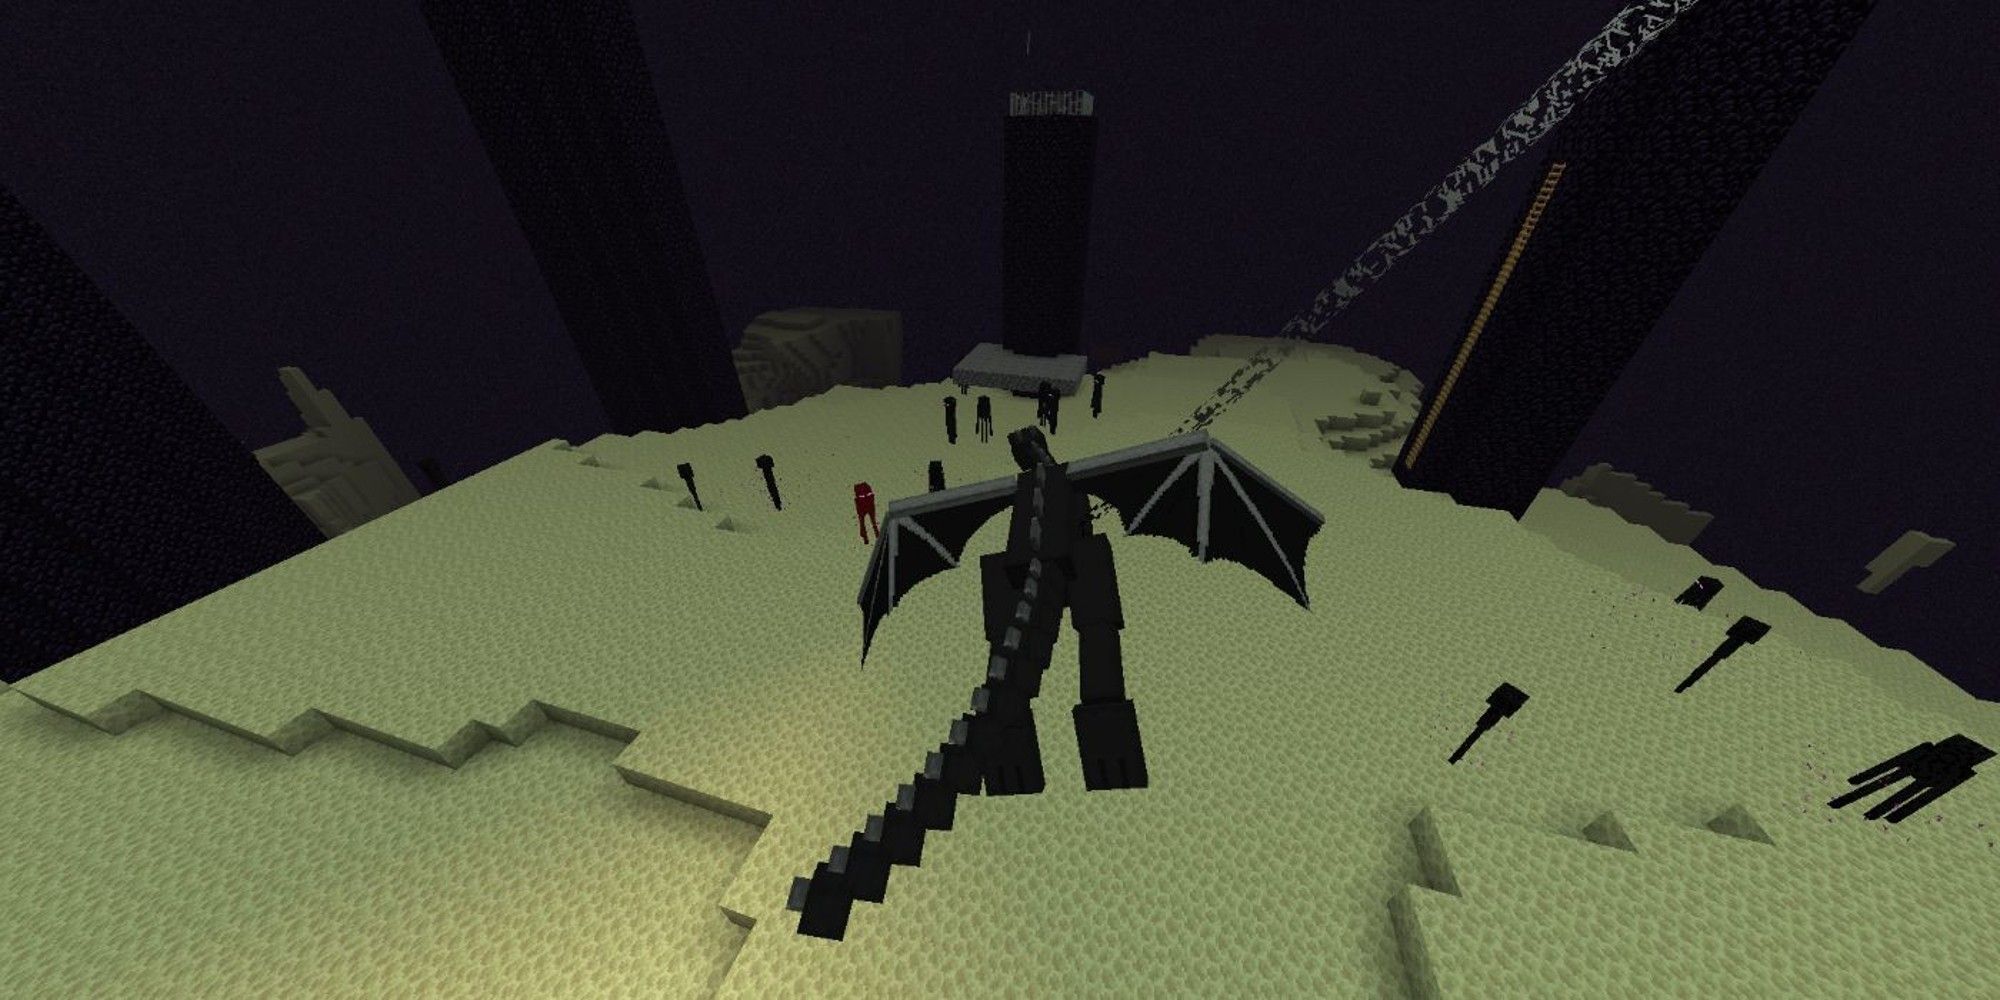 ender dragon viewed from on top of a tower, tethered to 1 end crystal